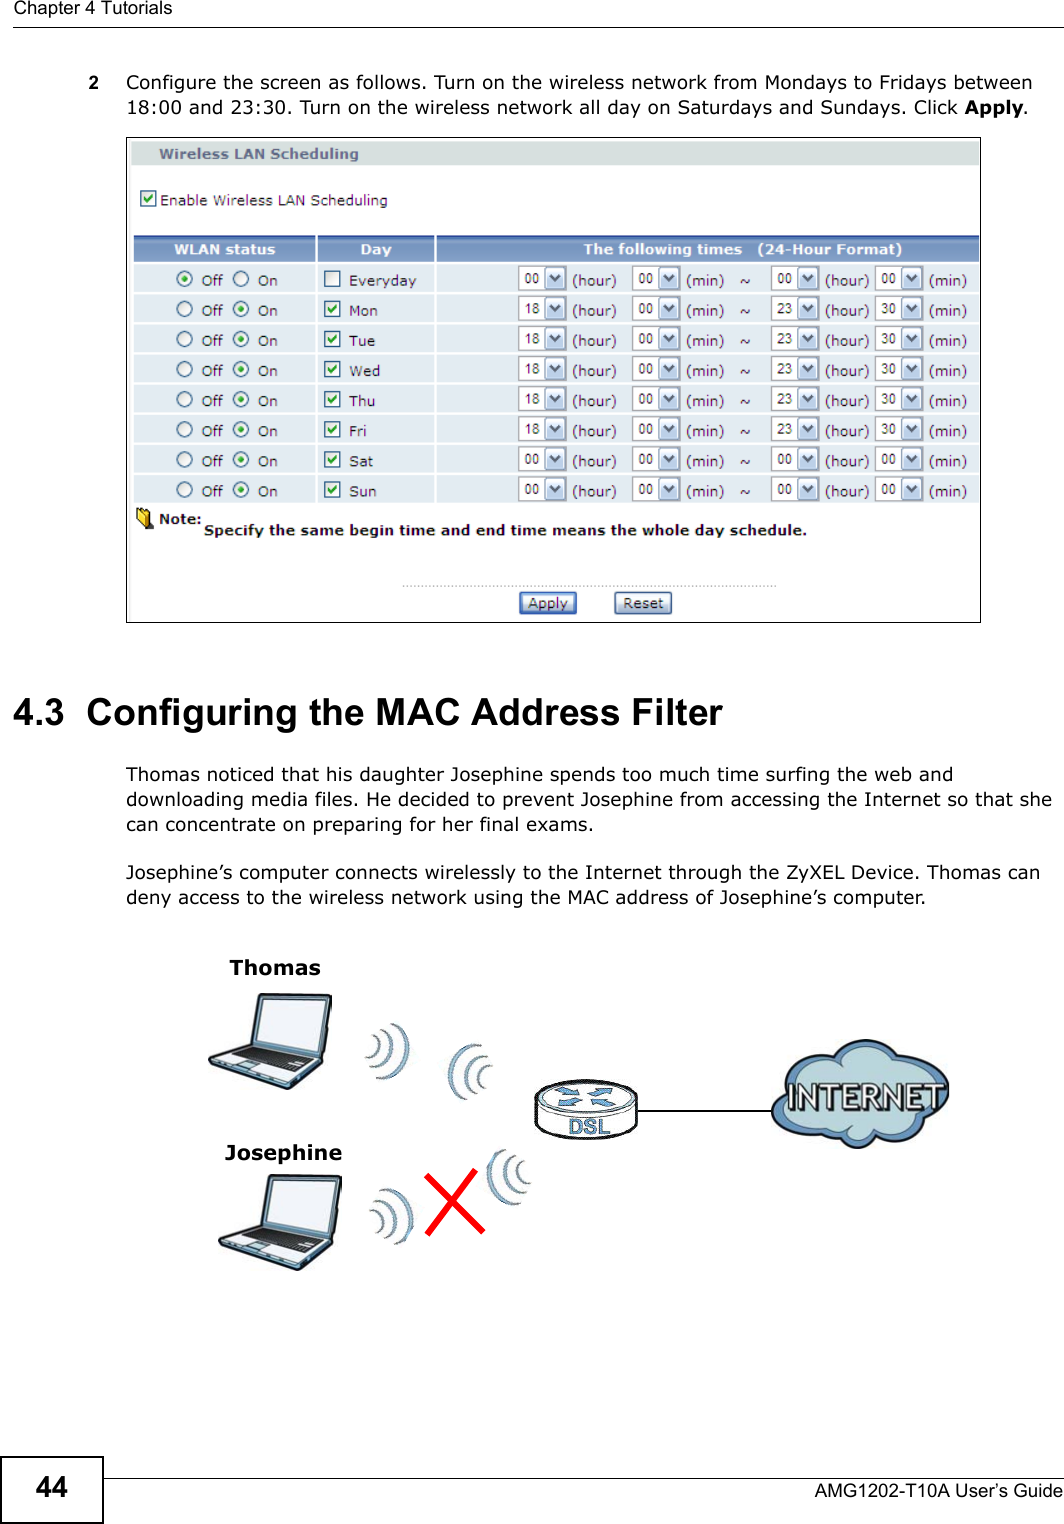 Chapter 4 TutorialsAMG1202-T10A User’s Guide442Configure the screen as follows. Turn on the wireless network from Mondays to Fridays between 18:00 and 23:30. Turn on the wireless network all day on Saturdays and Sundays. Click Apply.4.3  Configuring the MAC Address FilterThomas noticed that his daughter Josephine spends too much time surfing the web and downloading media files. He decided to prevent Josephine from accessing the Internet so that she can concentrate on preparing for her final exams.Josephine’s computer connects wirelessly to the Internet through the ZyXEL Device. Thomas can deny access to the wireless network using the MAC address of Josephine’s computer.ThomasJosephine